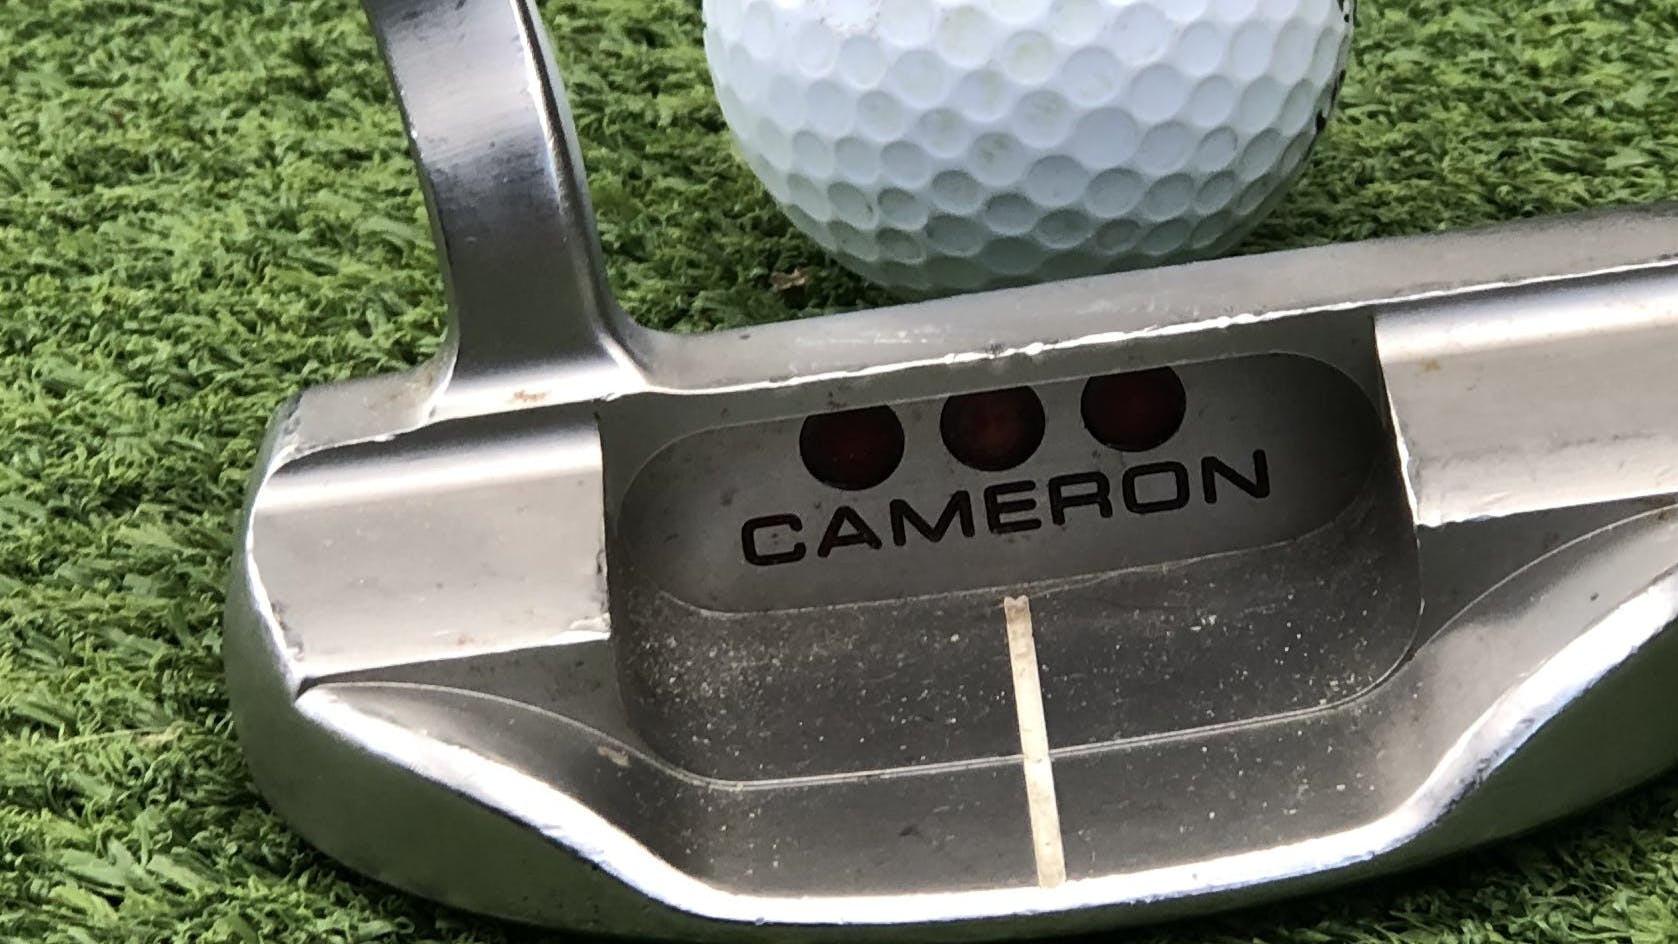 The Scotty Cameron Special Select Fastback 1.5 Putter in front of a golf ball.